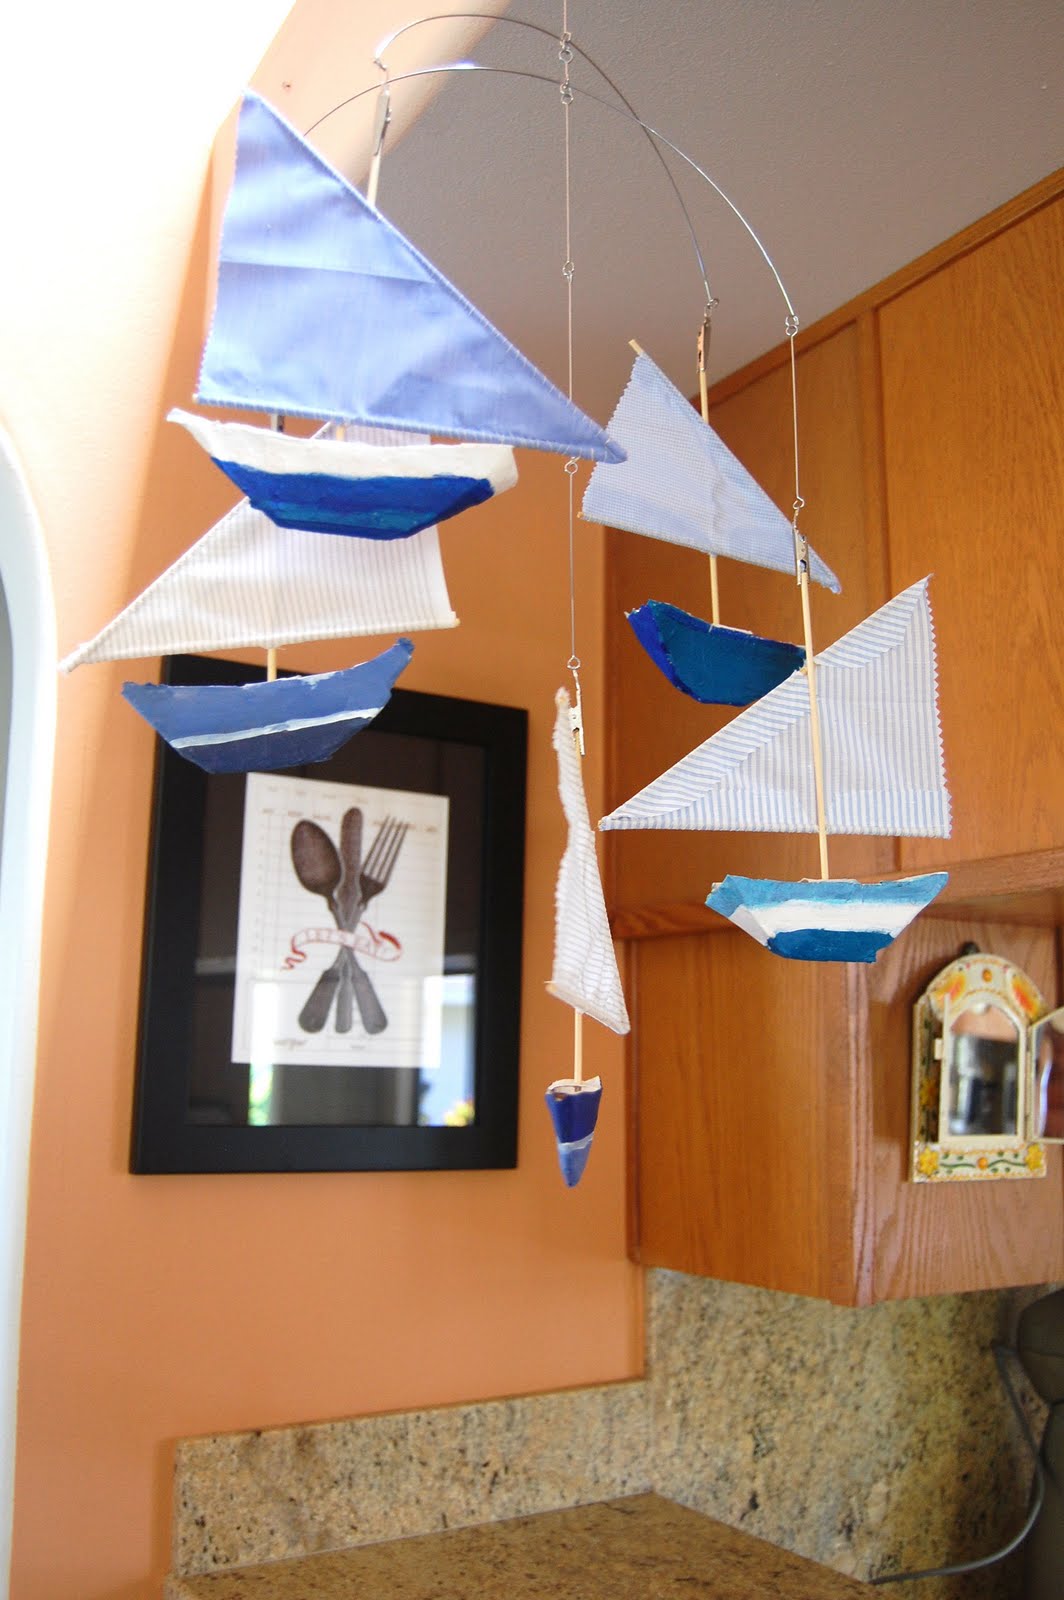 Here is a sailboat mobile I just finished recently. Follow along to 